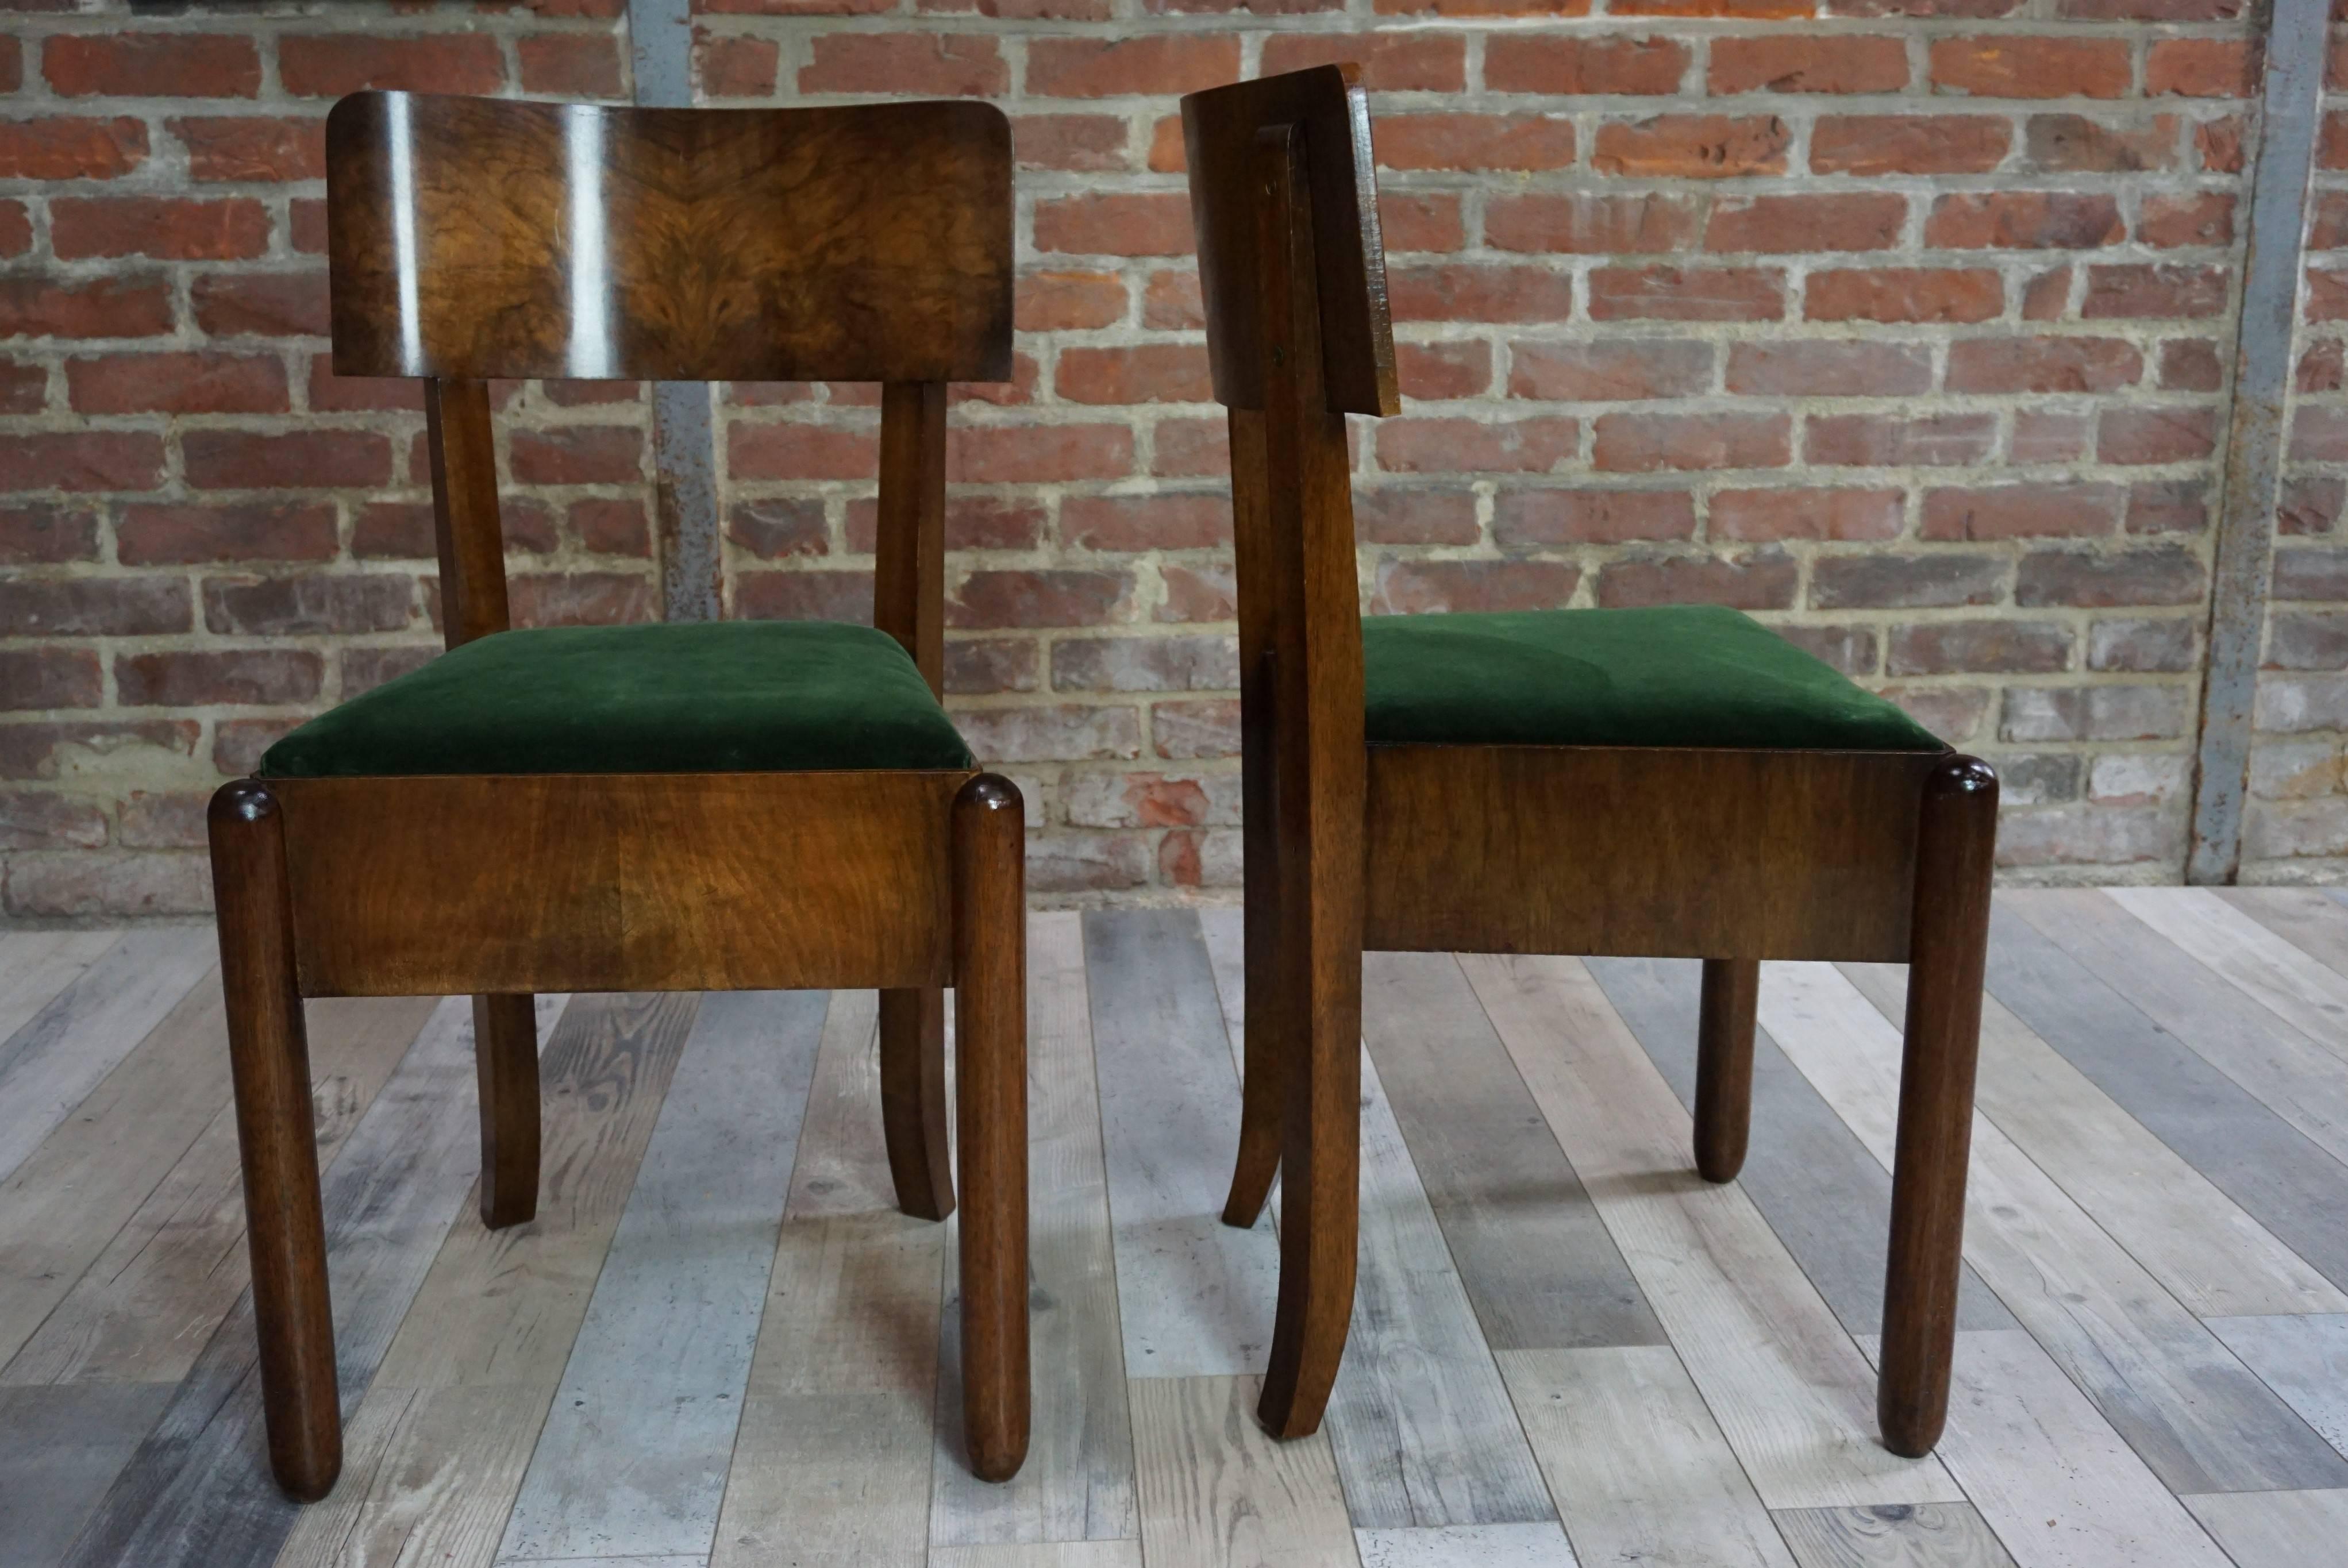 Pair of French Art Deco chair, 1930. The velvet is new. Beautiful walnut.